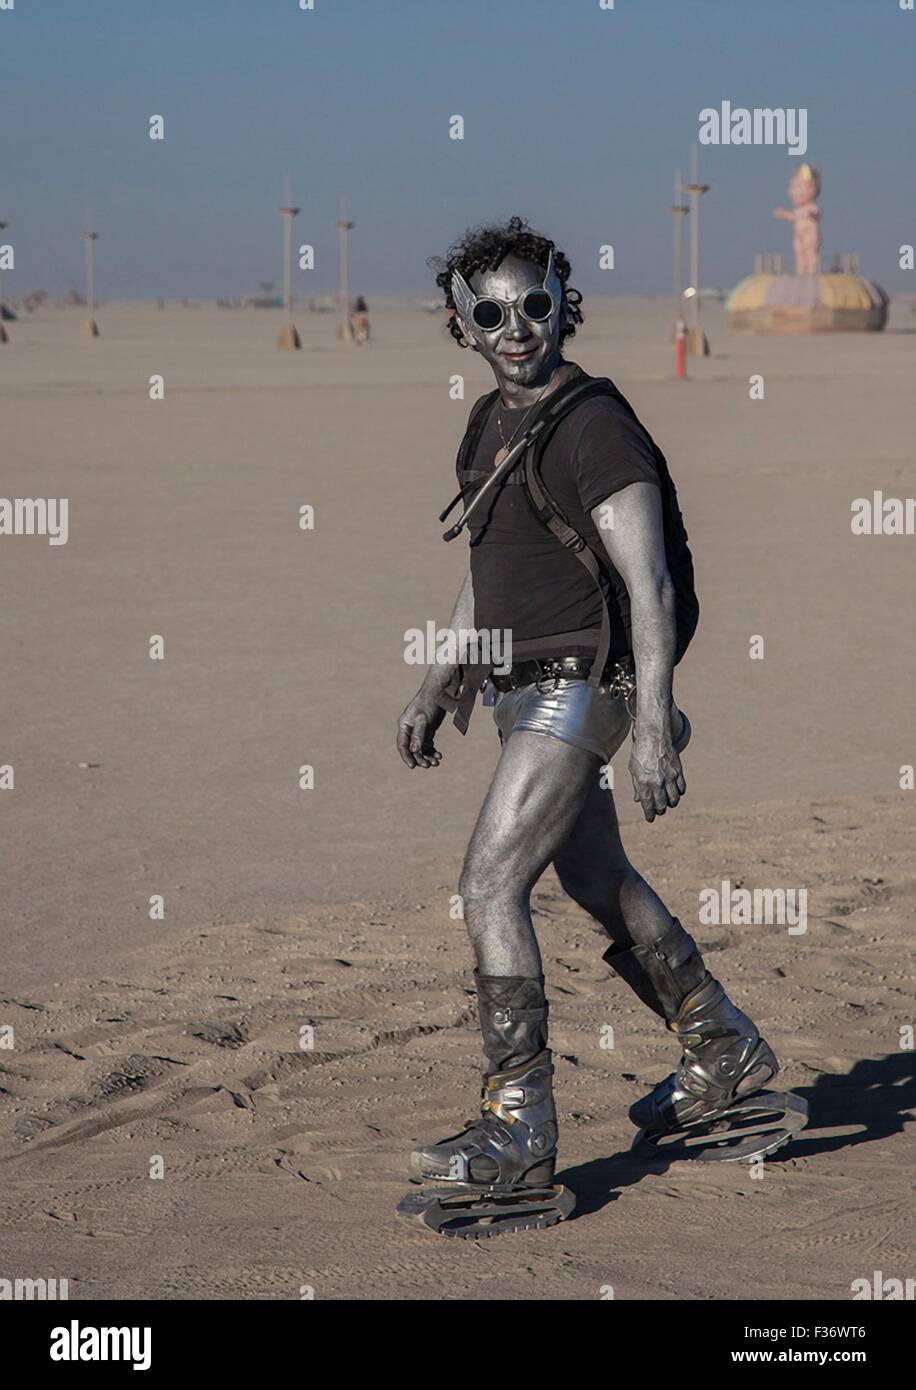 A Burner dressed as an alien in the playa during the annual Burning Man festival in the desert September 2, 2012 in Black Rock City, Nevada. Stock Photo